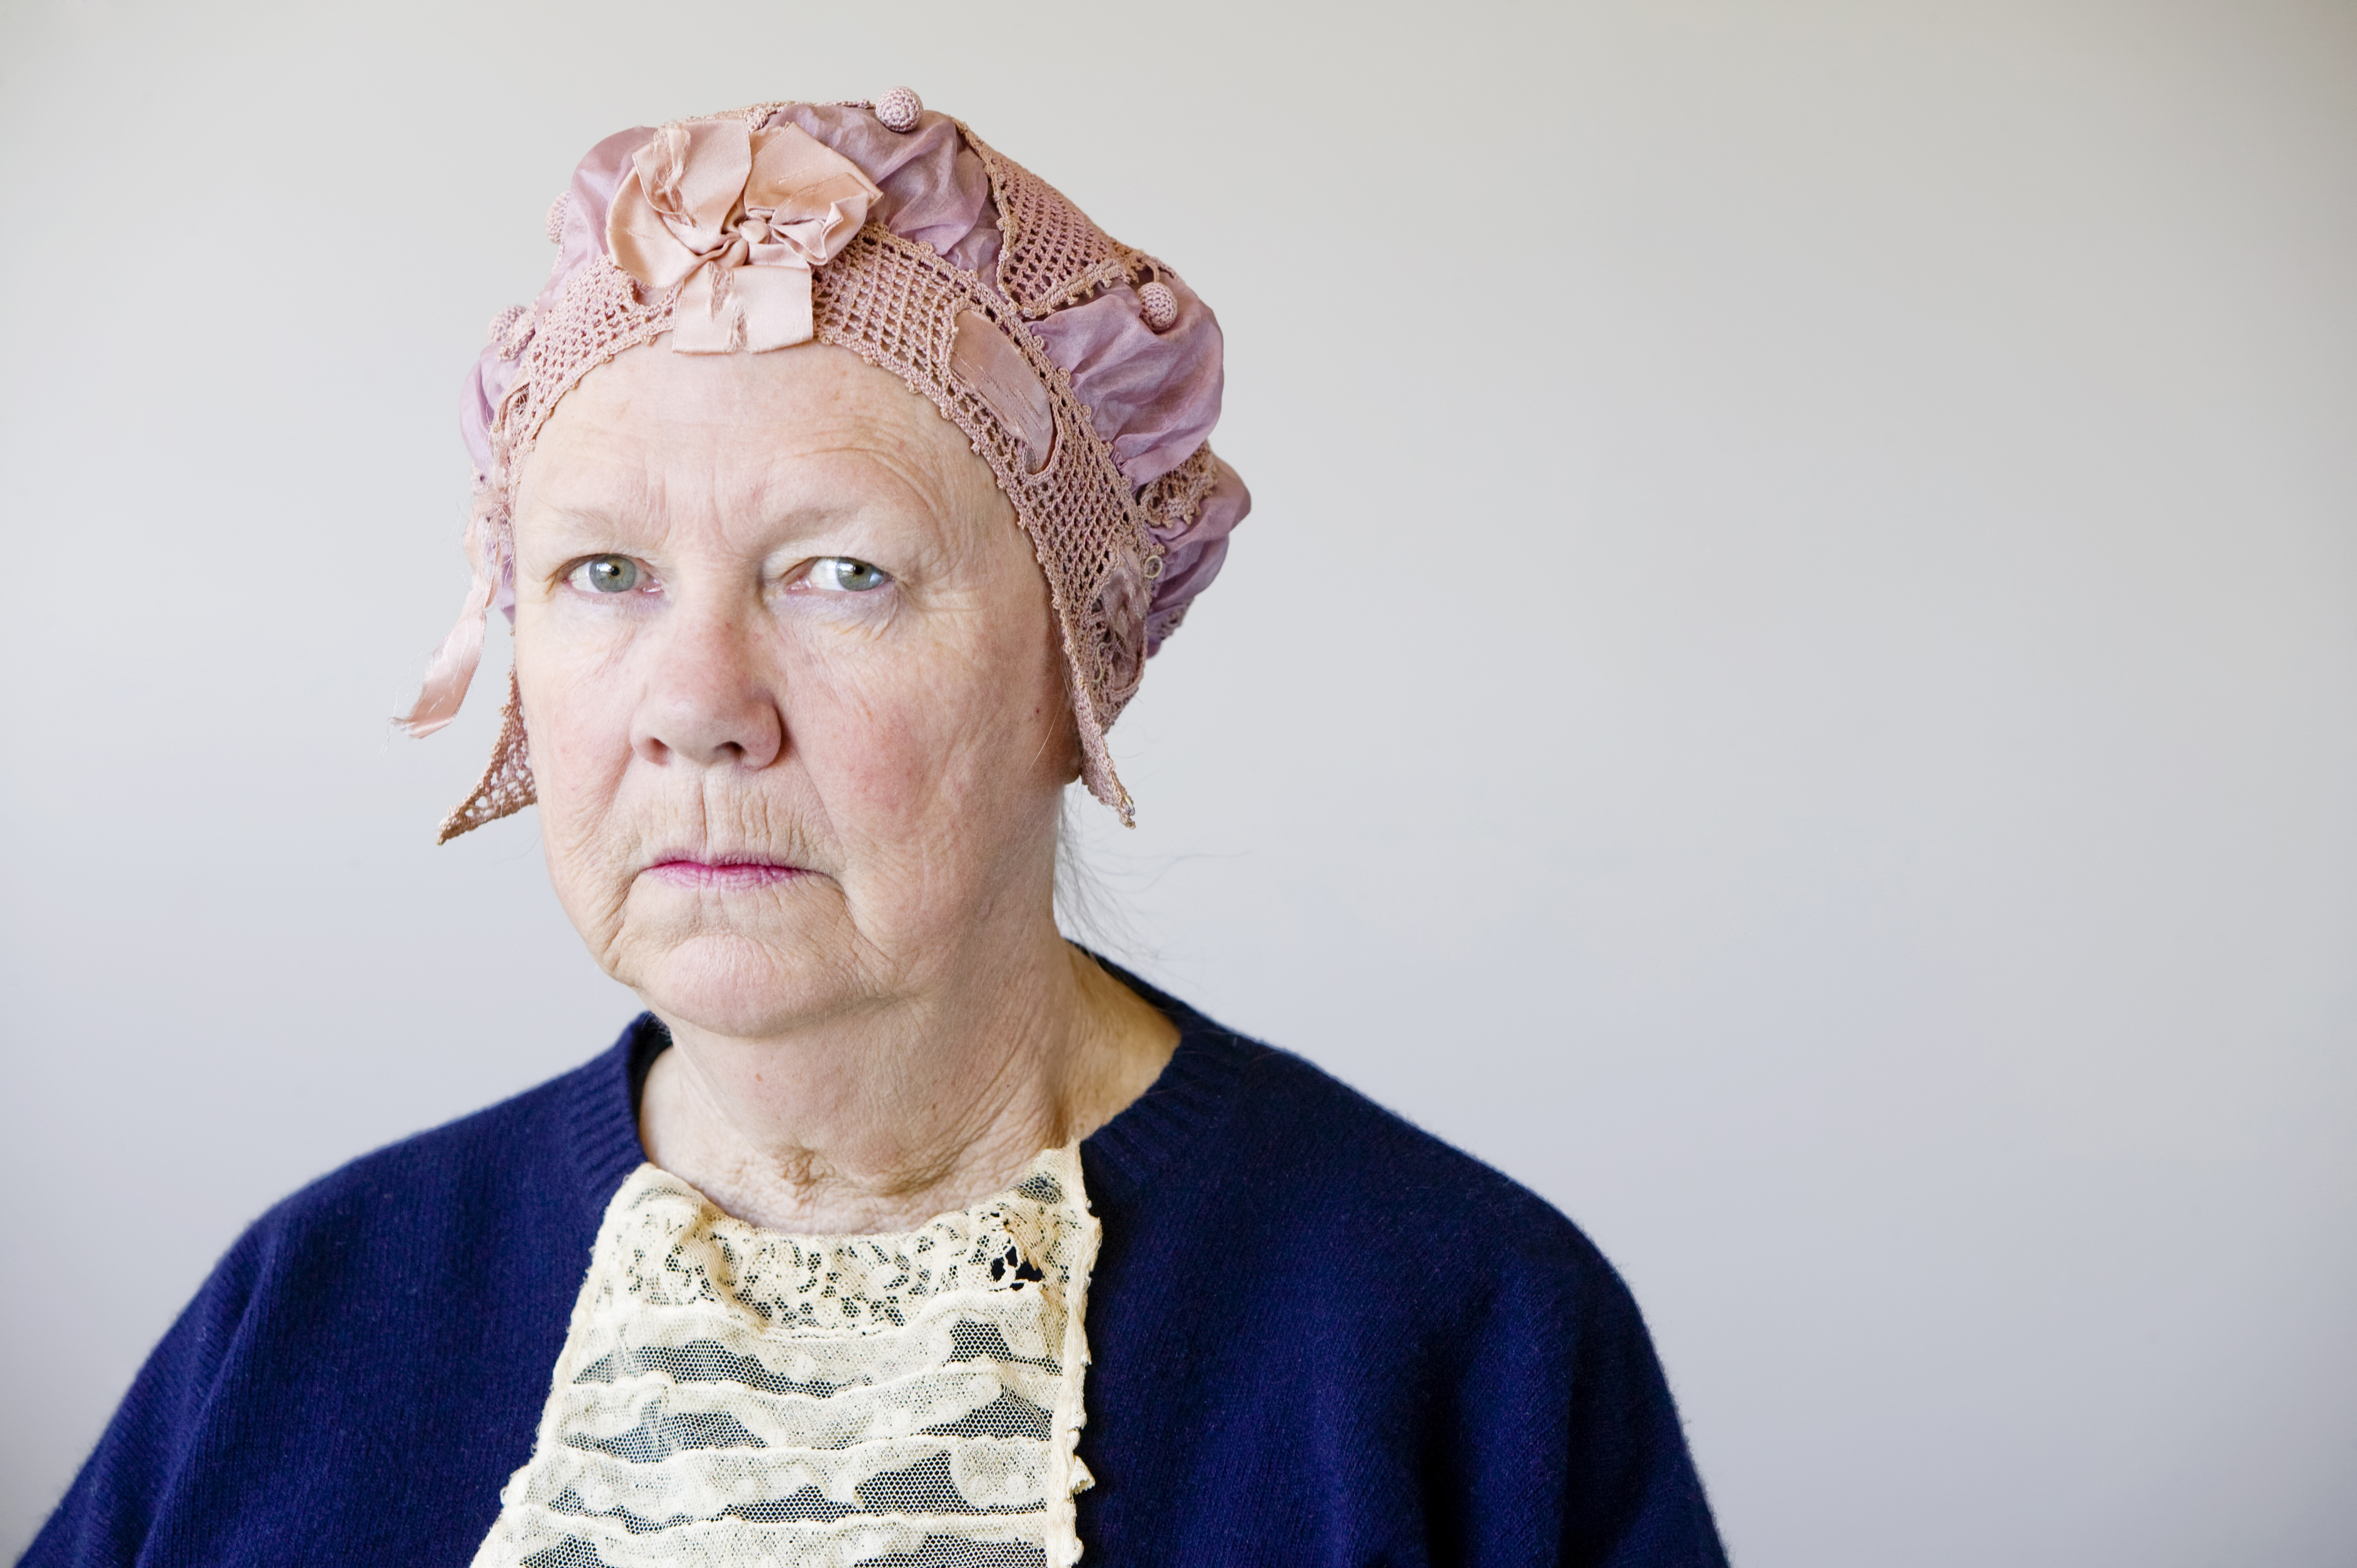 An angry older woman | Source: Shutterstock